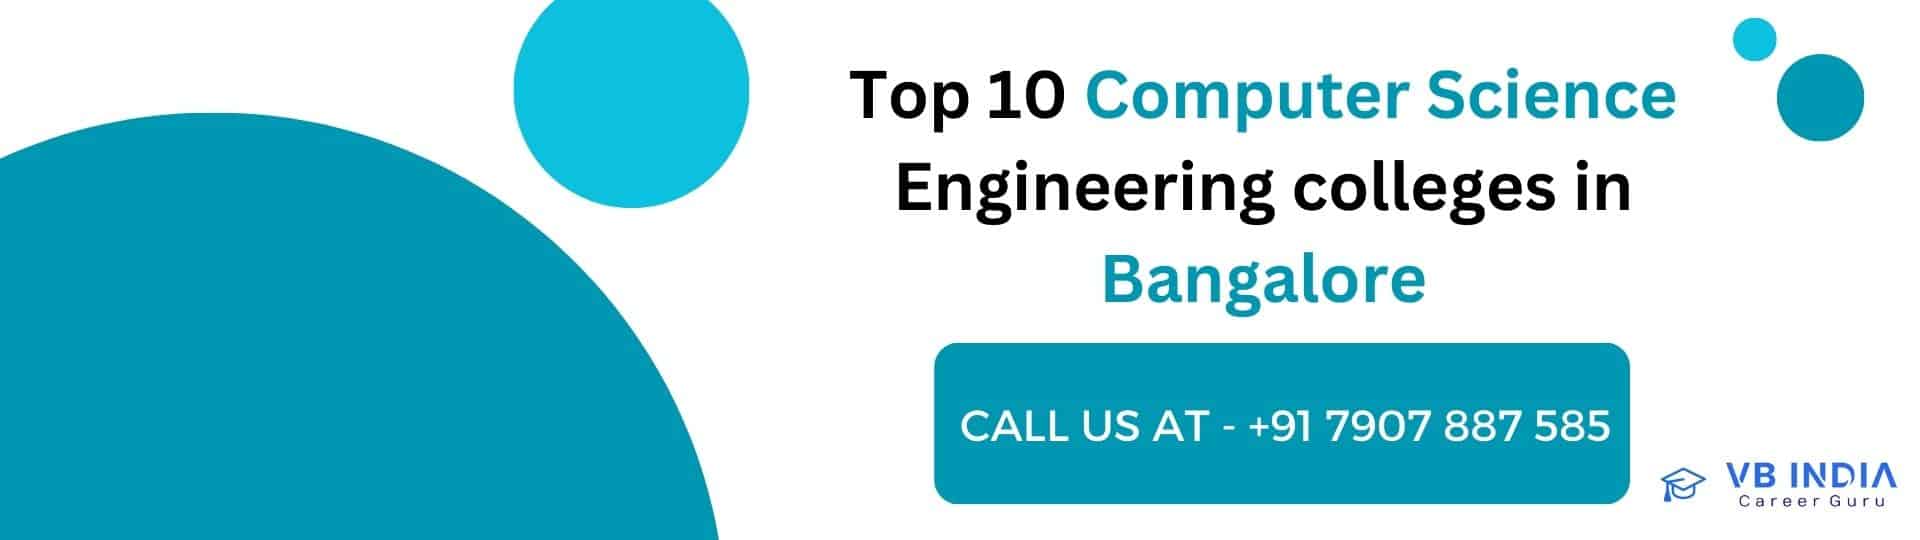 top 10 computer science engineering colleges in bangalore